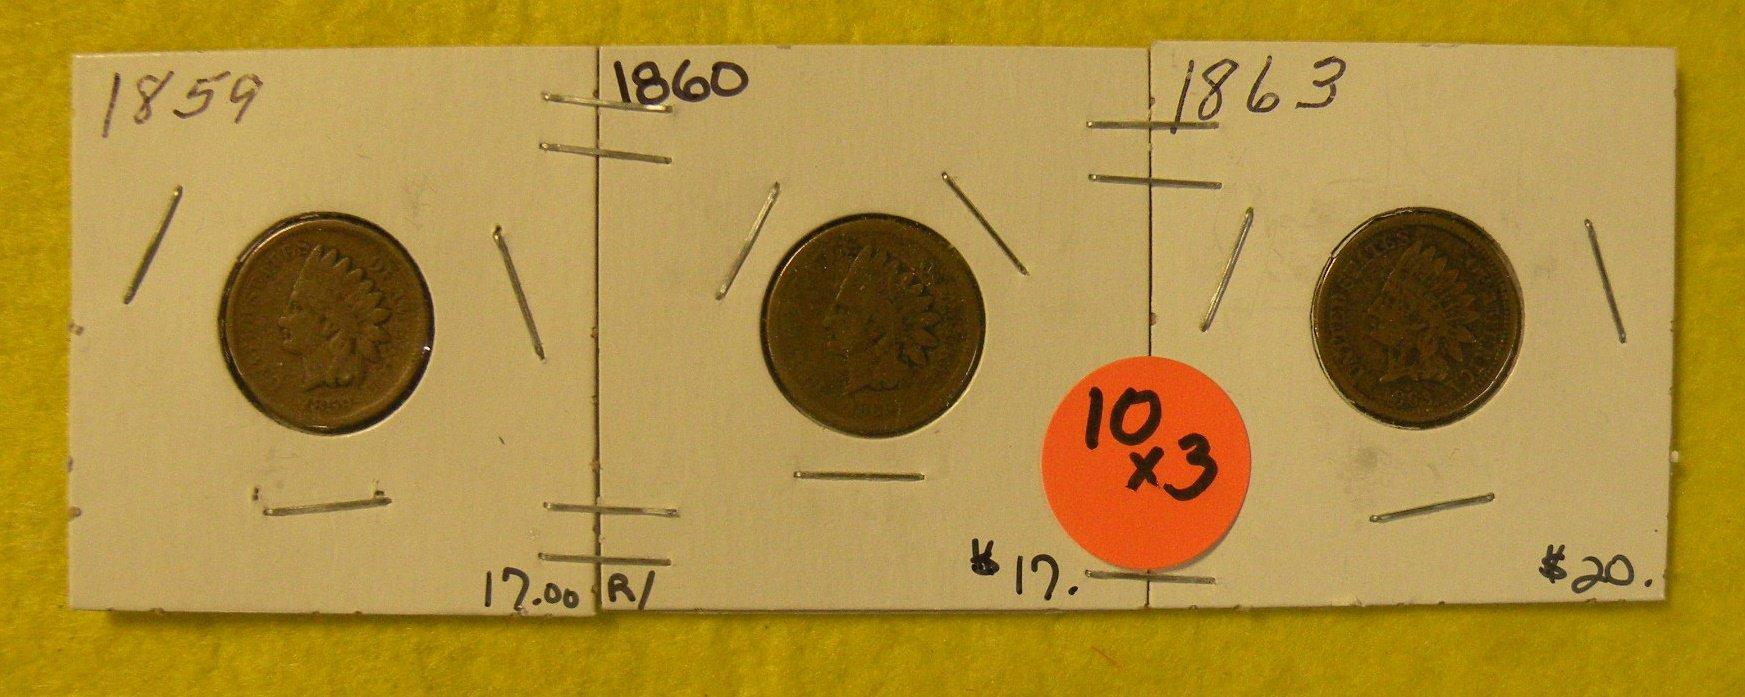 1859, 1860, 1863 INDIAN HEAD PENNIES - 3 TIMES MONEY